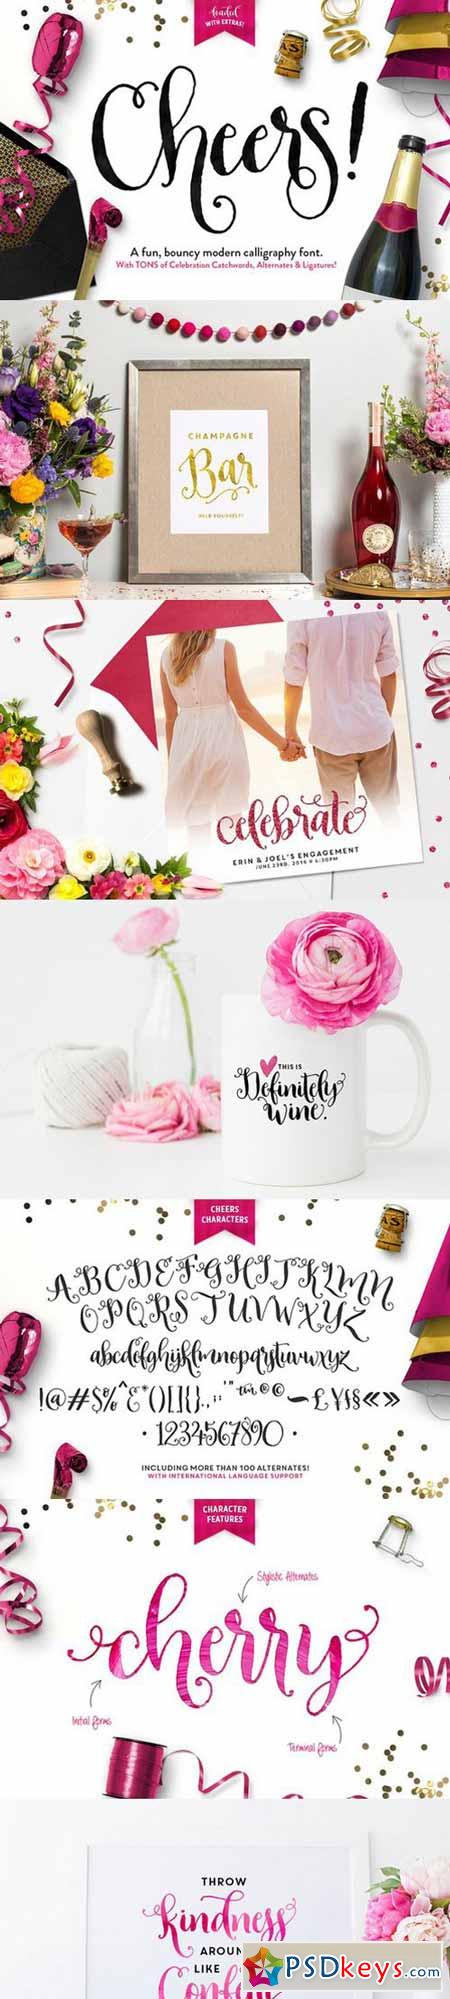 Cheers Font & Graphics Pack 620531